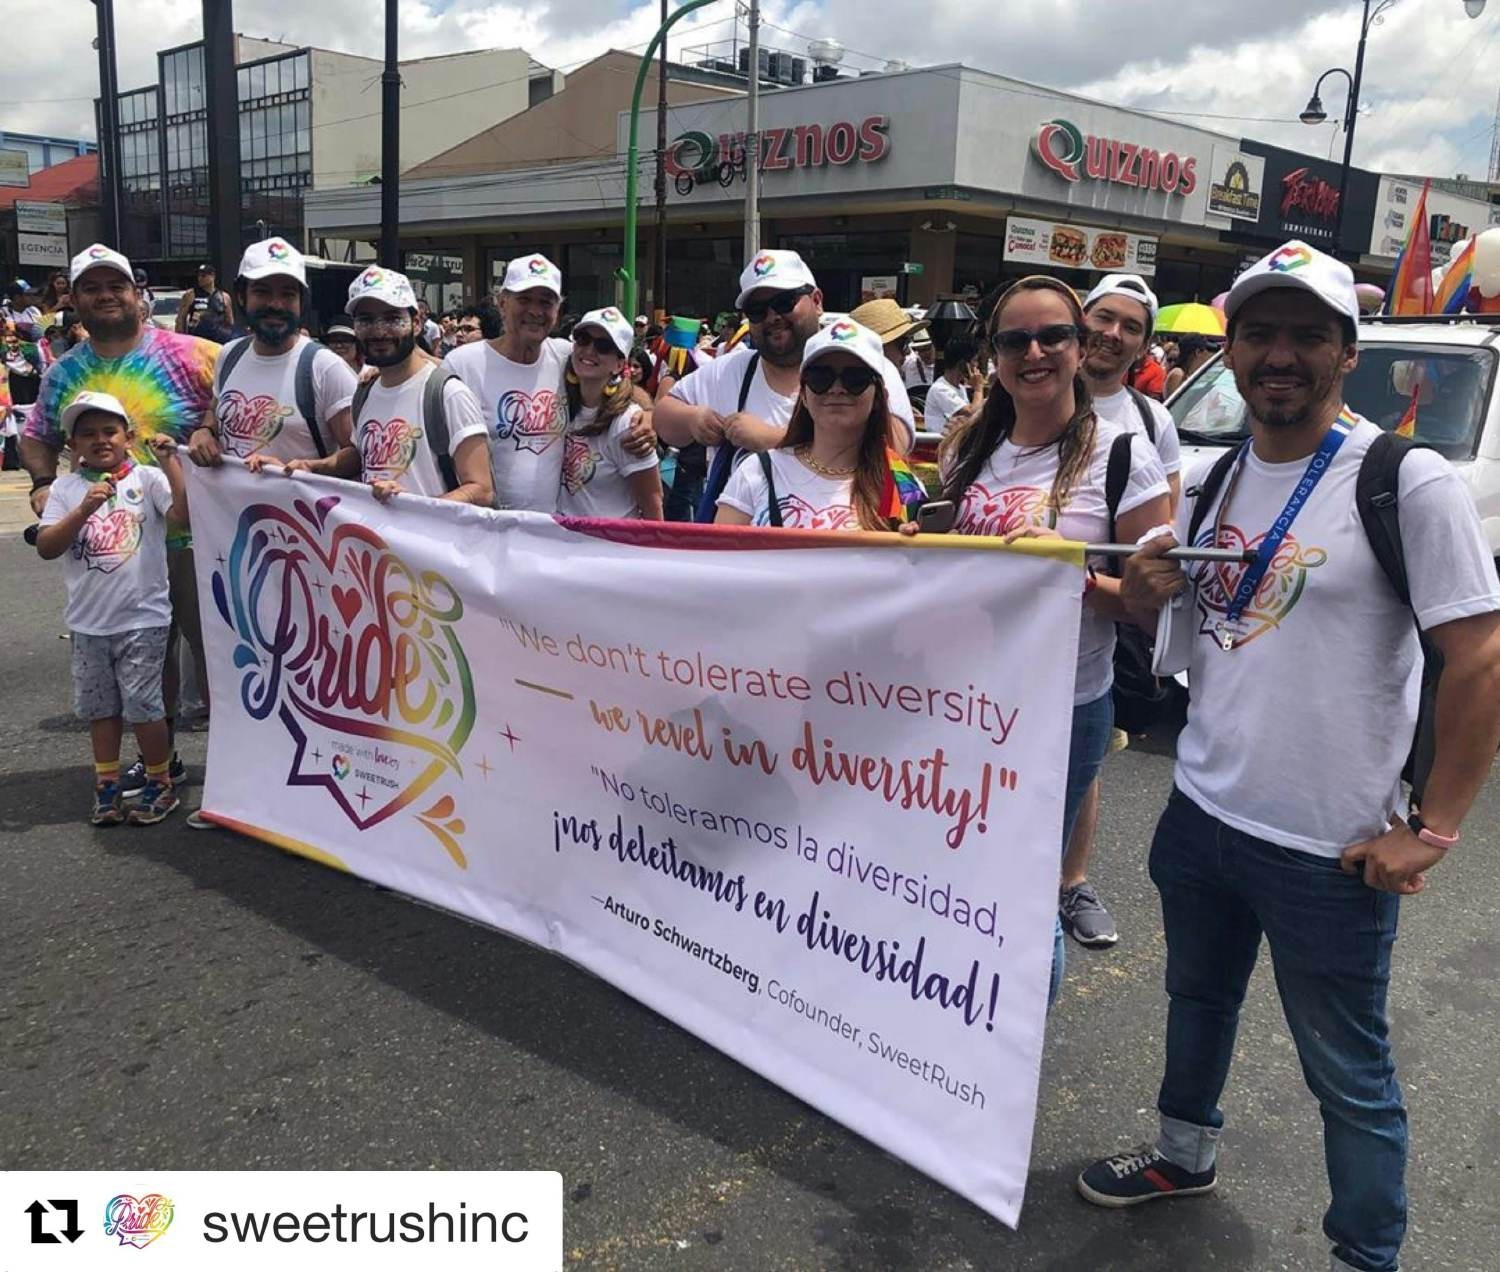 Leaders of SweetRush’s Partners in Pride ERG and teammates at the 2019 Costa Rica Pride pride. “We revel in diversity!”